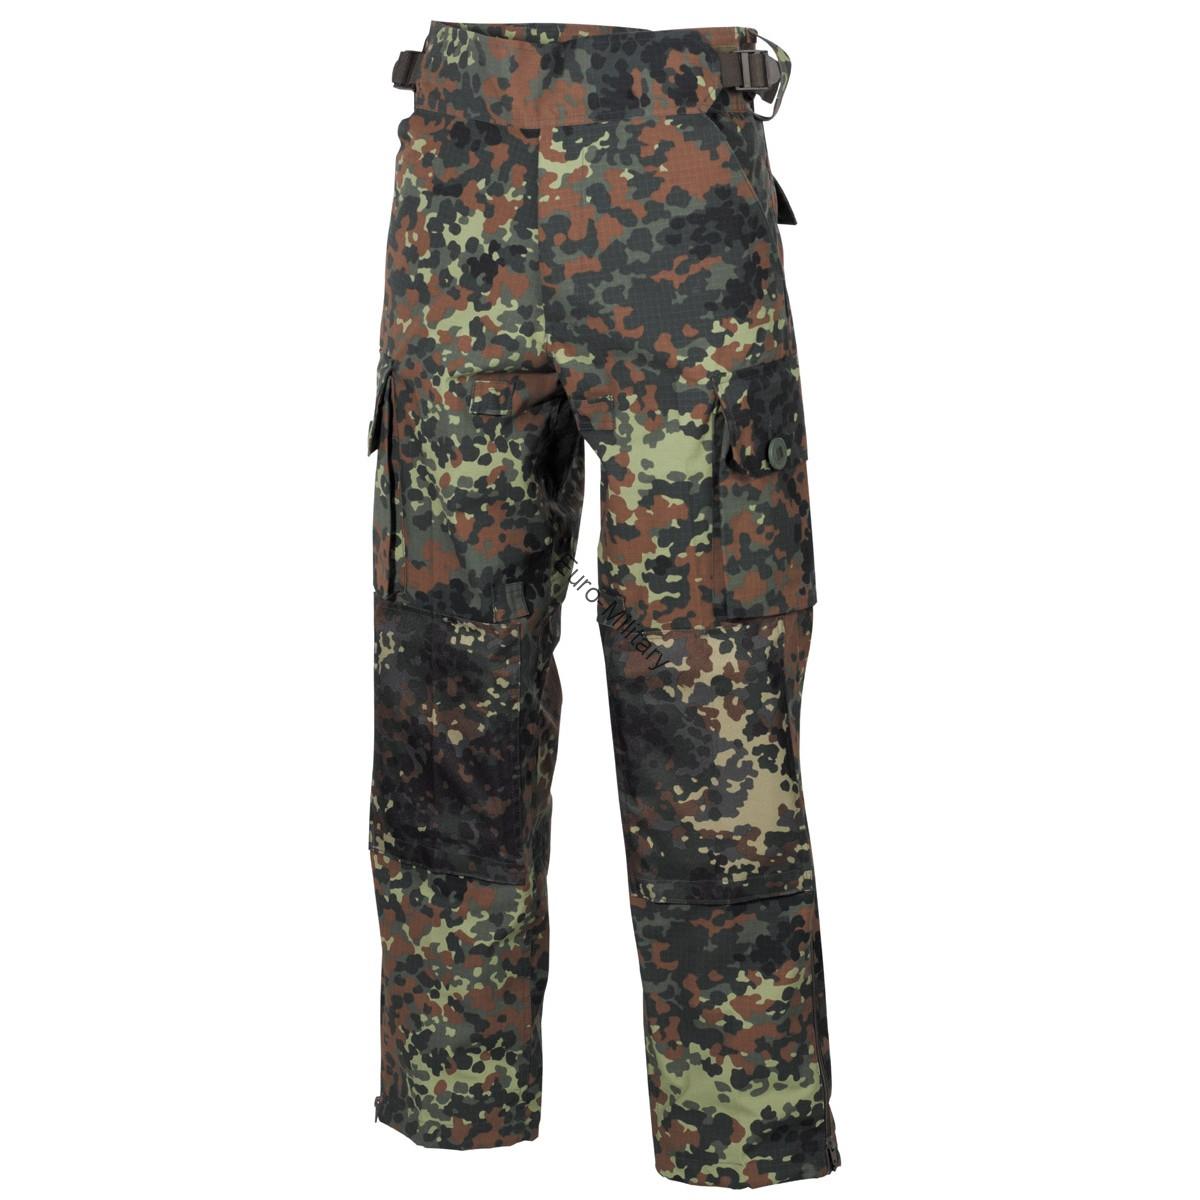 Premium Tactical Military Battle Trousers COMMANDOS - BW German Army Camo